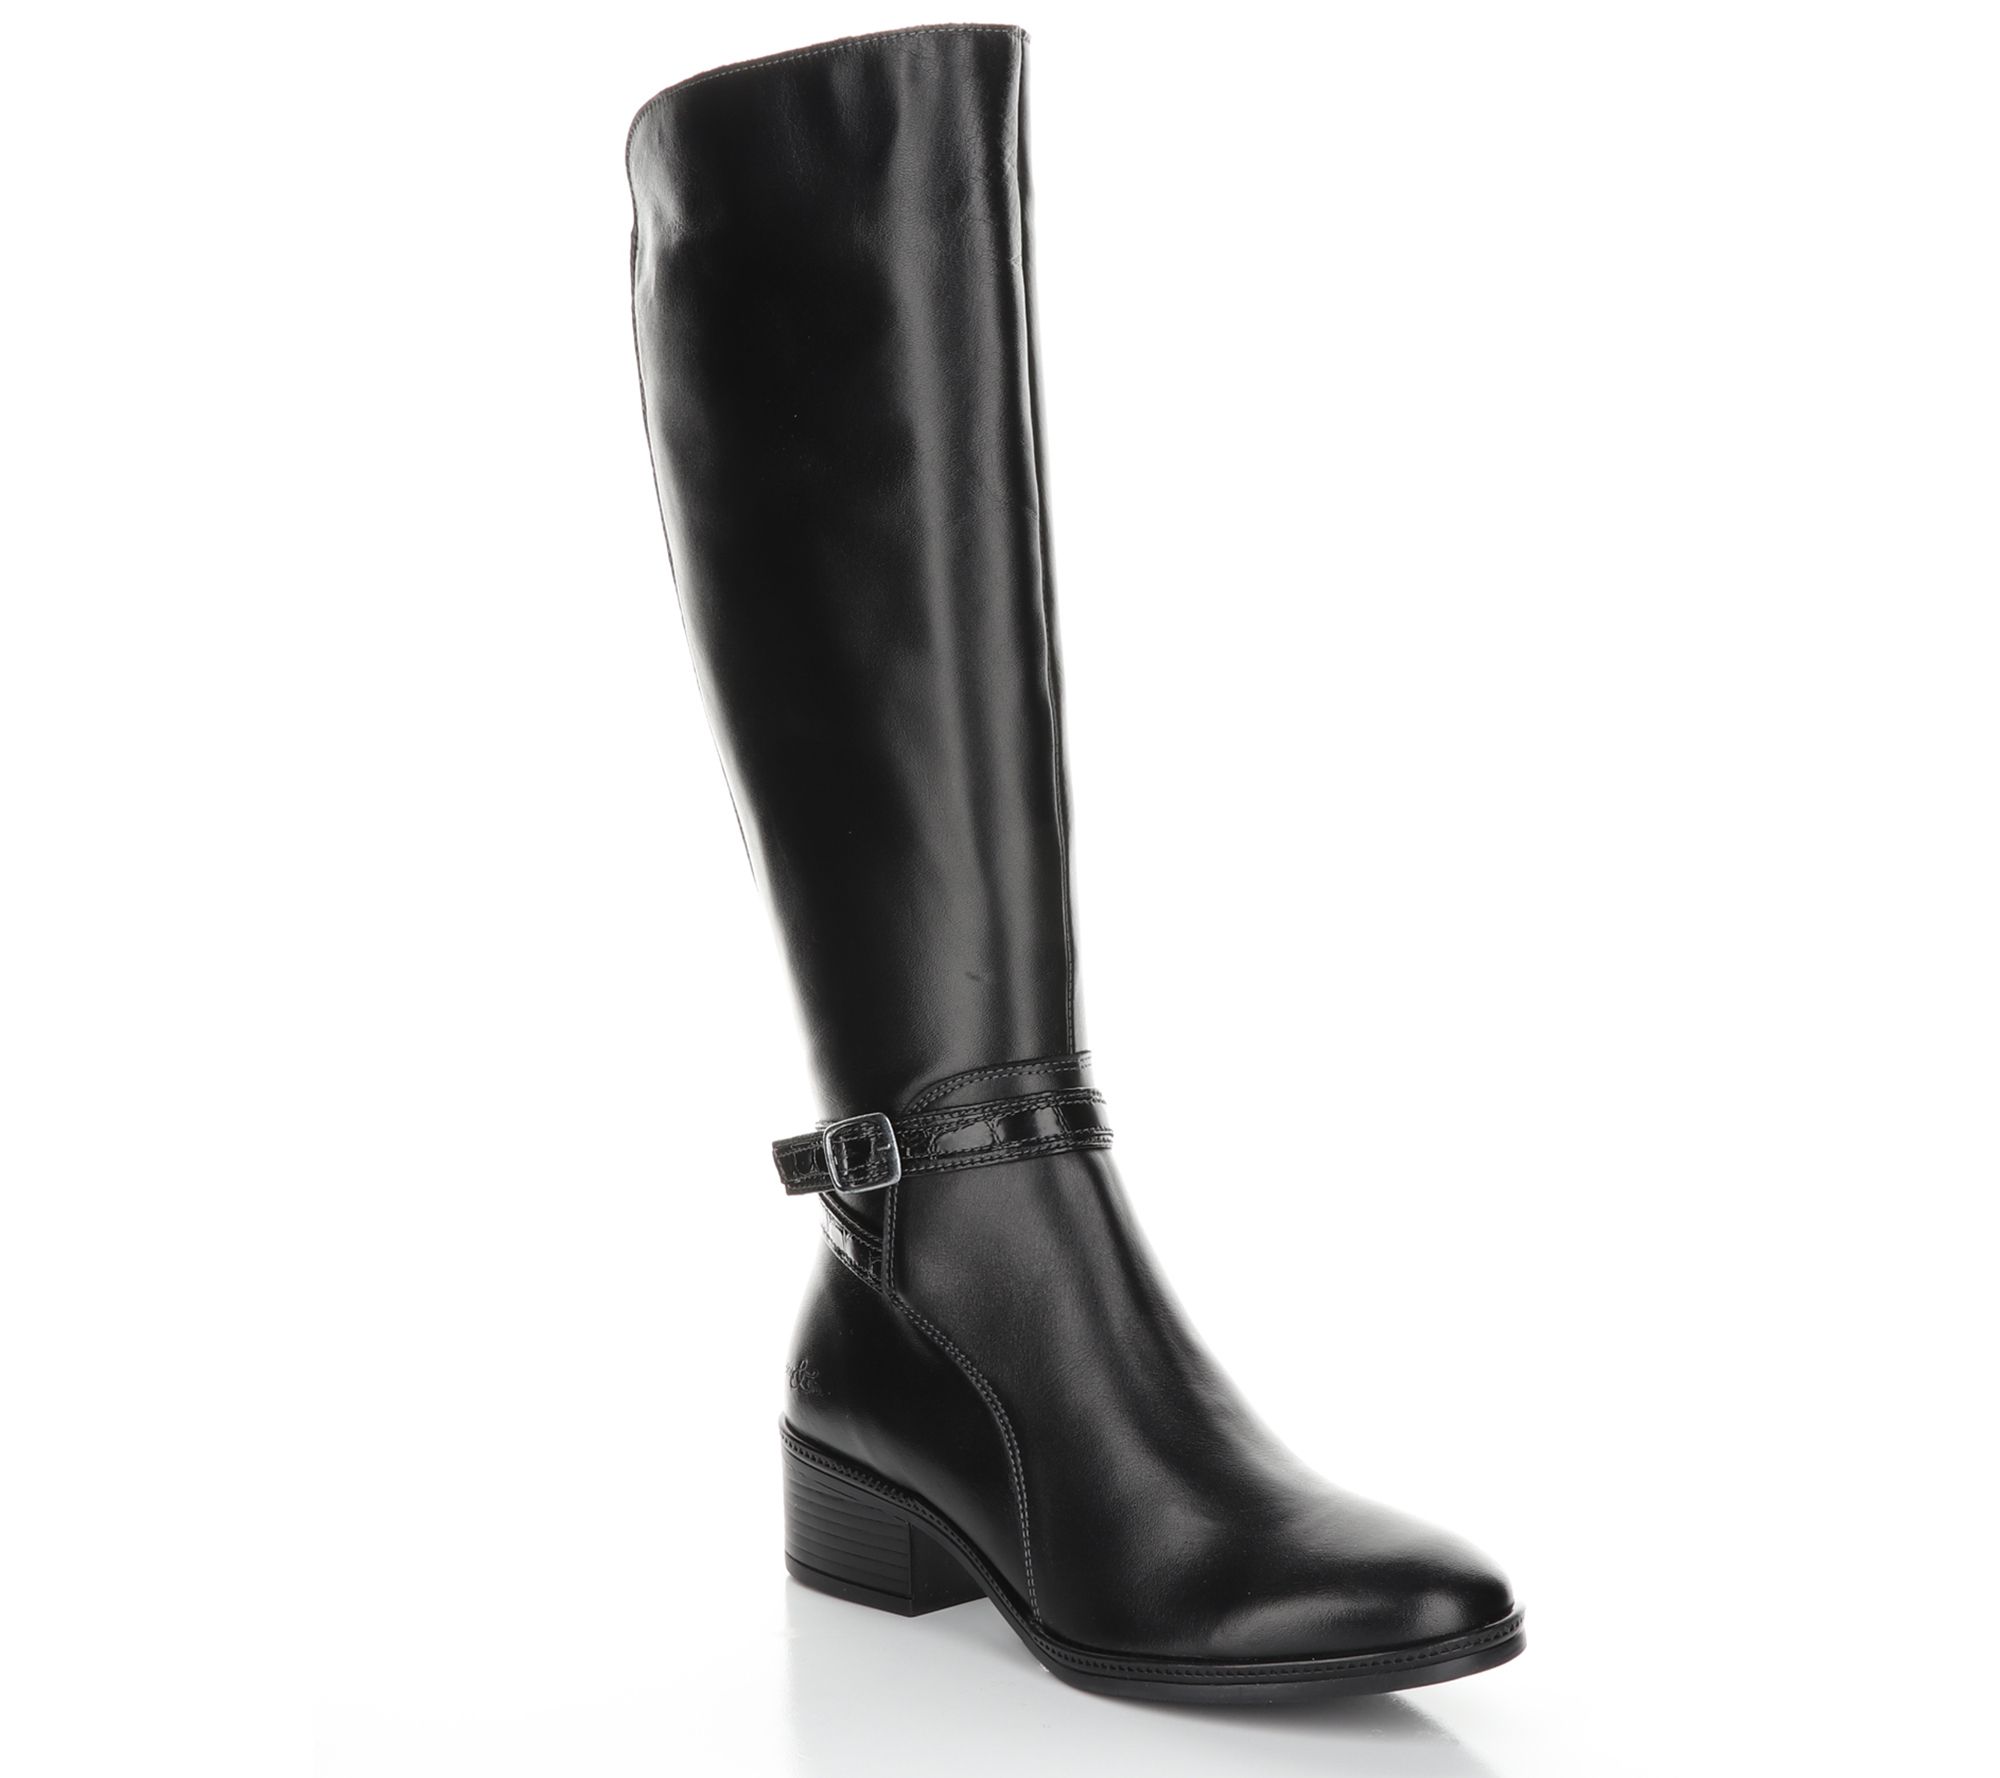 Bos & Co. Leather Tall Boots - Jade - QVC.com